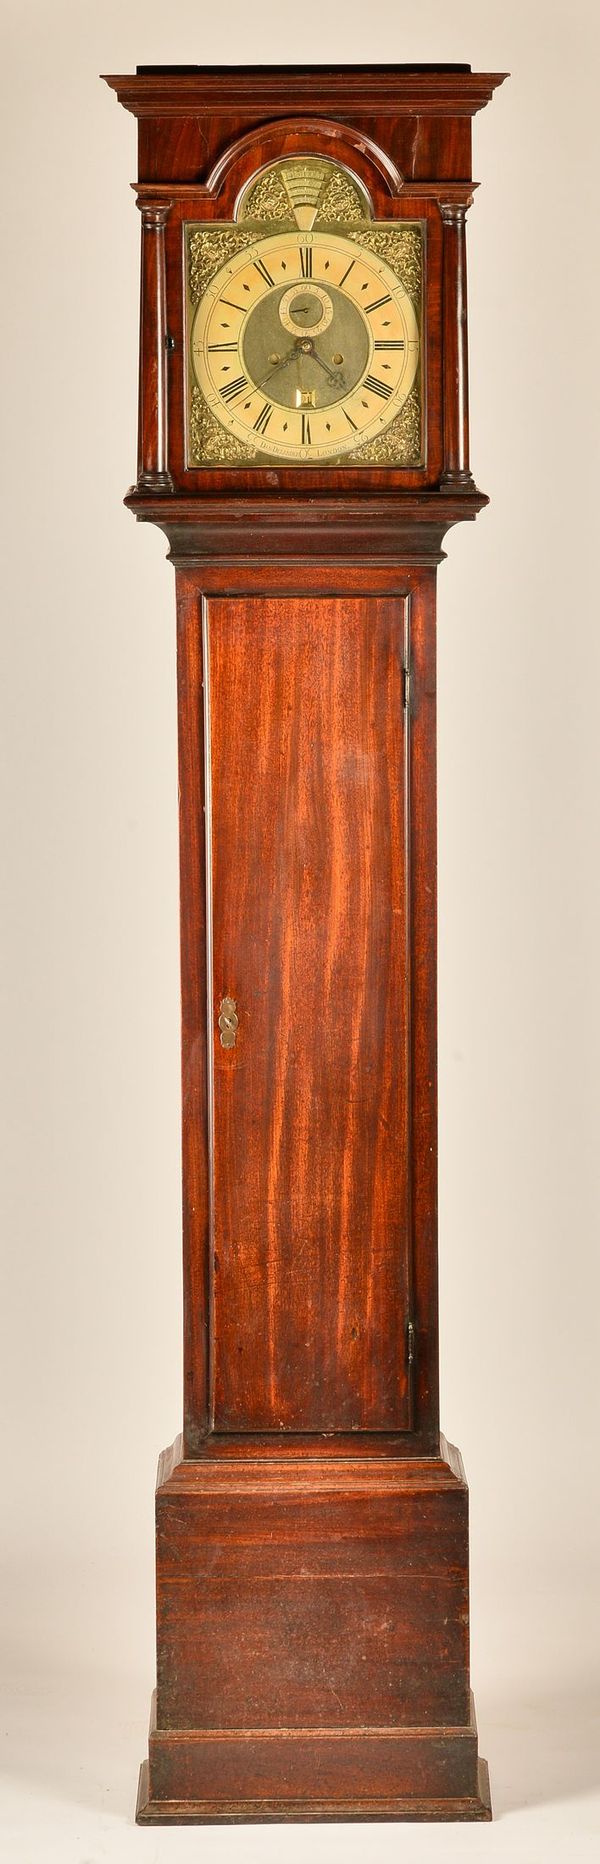 A GEORGE II MAHOGANY STRIKING LONGCASE CLOCK WITH YEAR CALENDAR AND EQUATION OF TIME